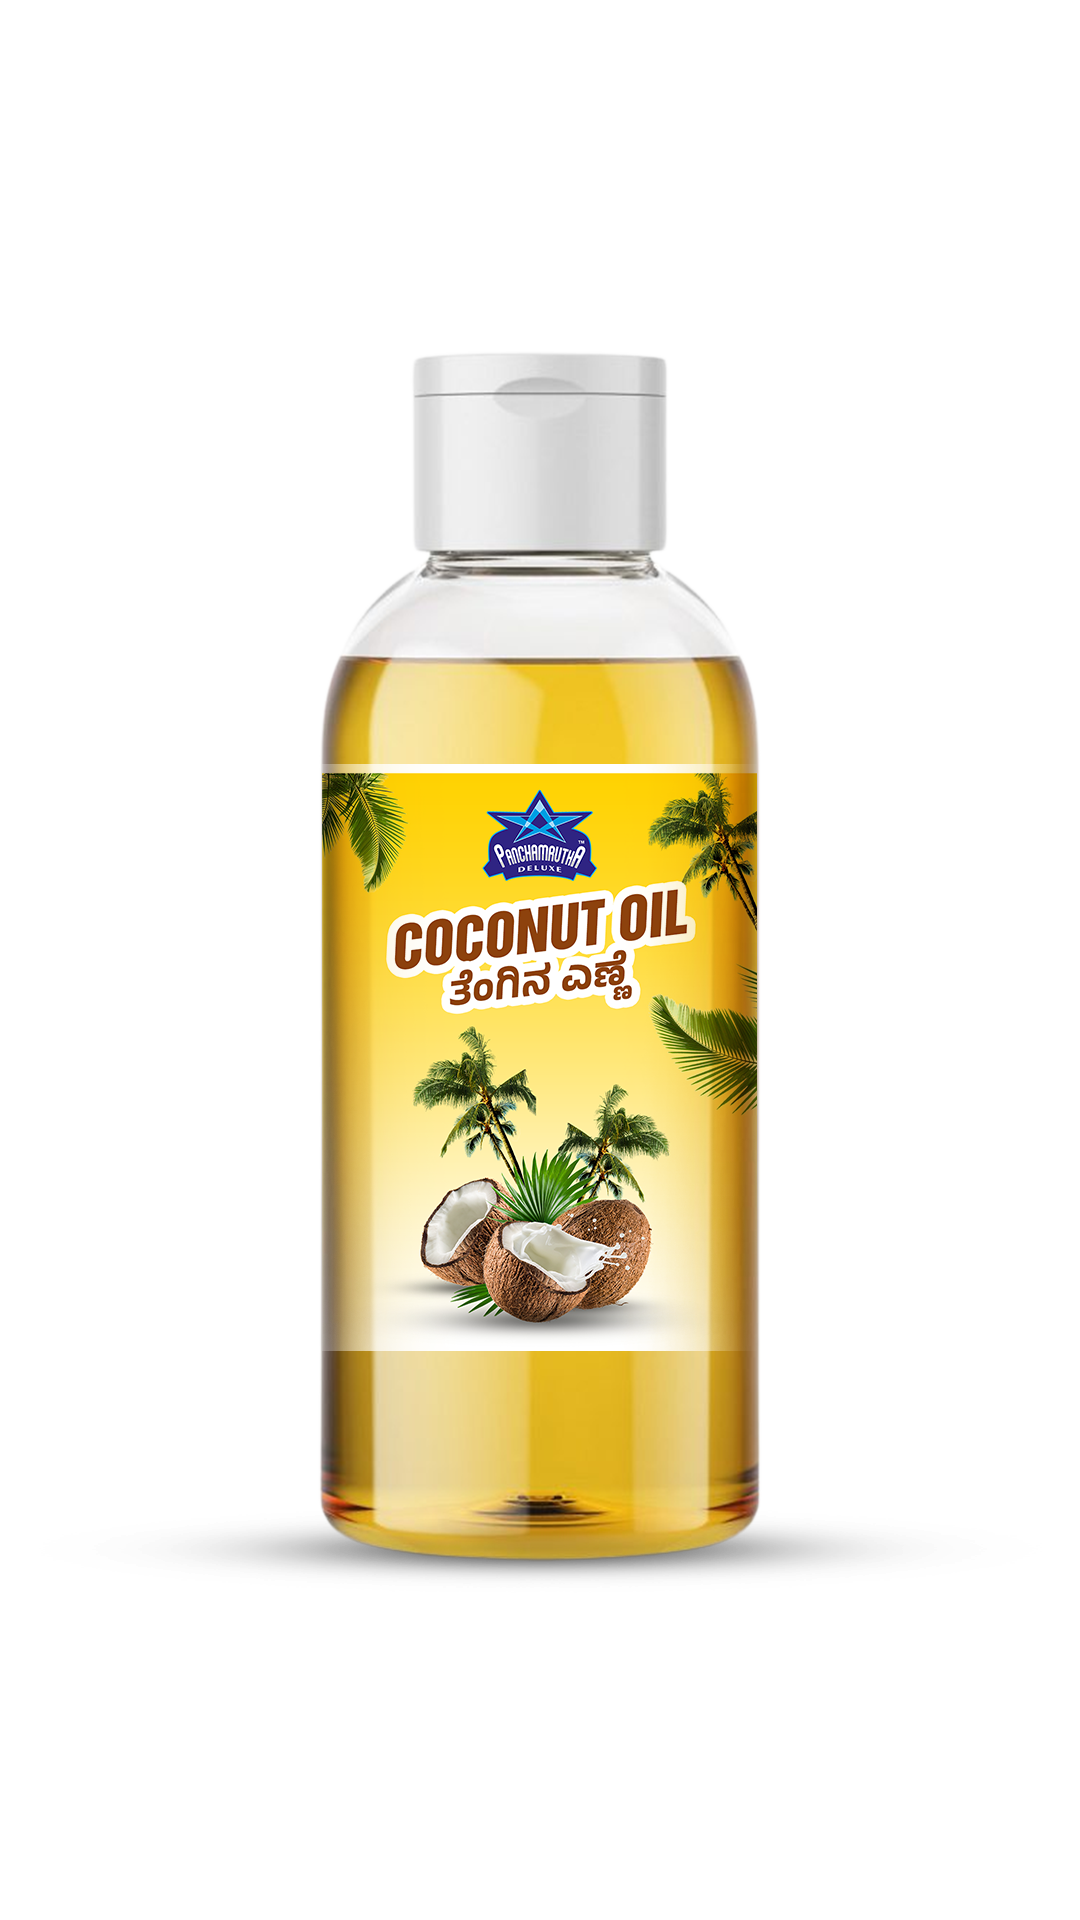 VIRGIN COCONUT OIL ಕೊಬ್ಬರಿ ಎಣ್ಣೆ COLD PRESSED, PANCHAMRUTHA DELUXE